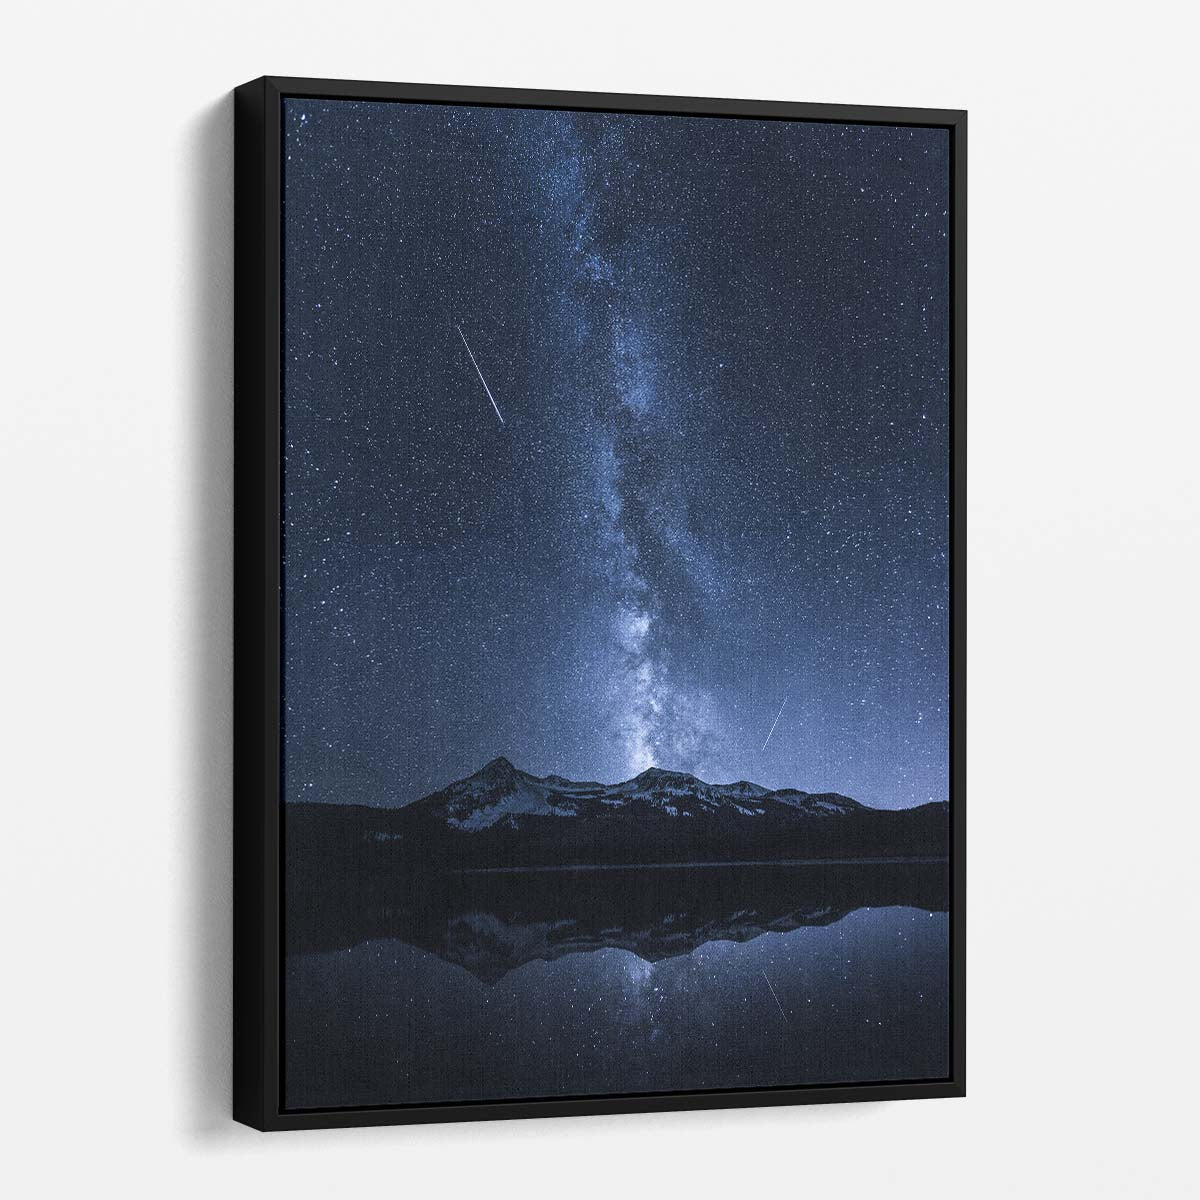 Starry Night Reflection Majestic Colorado Lake Astrophotography Art by Luxuriance Designs, made in USA